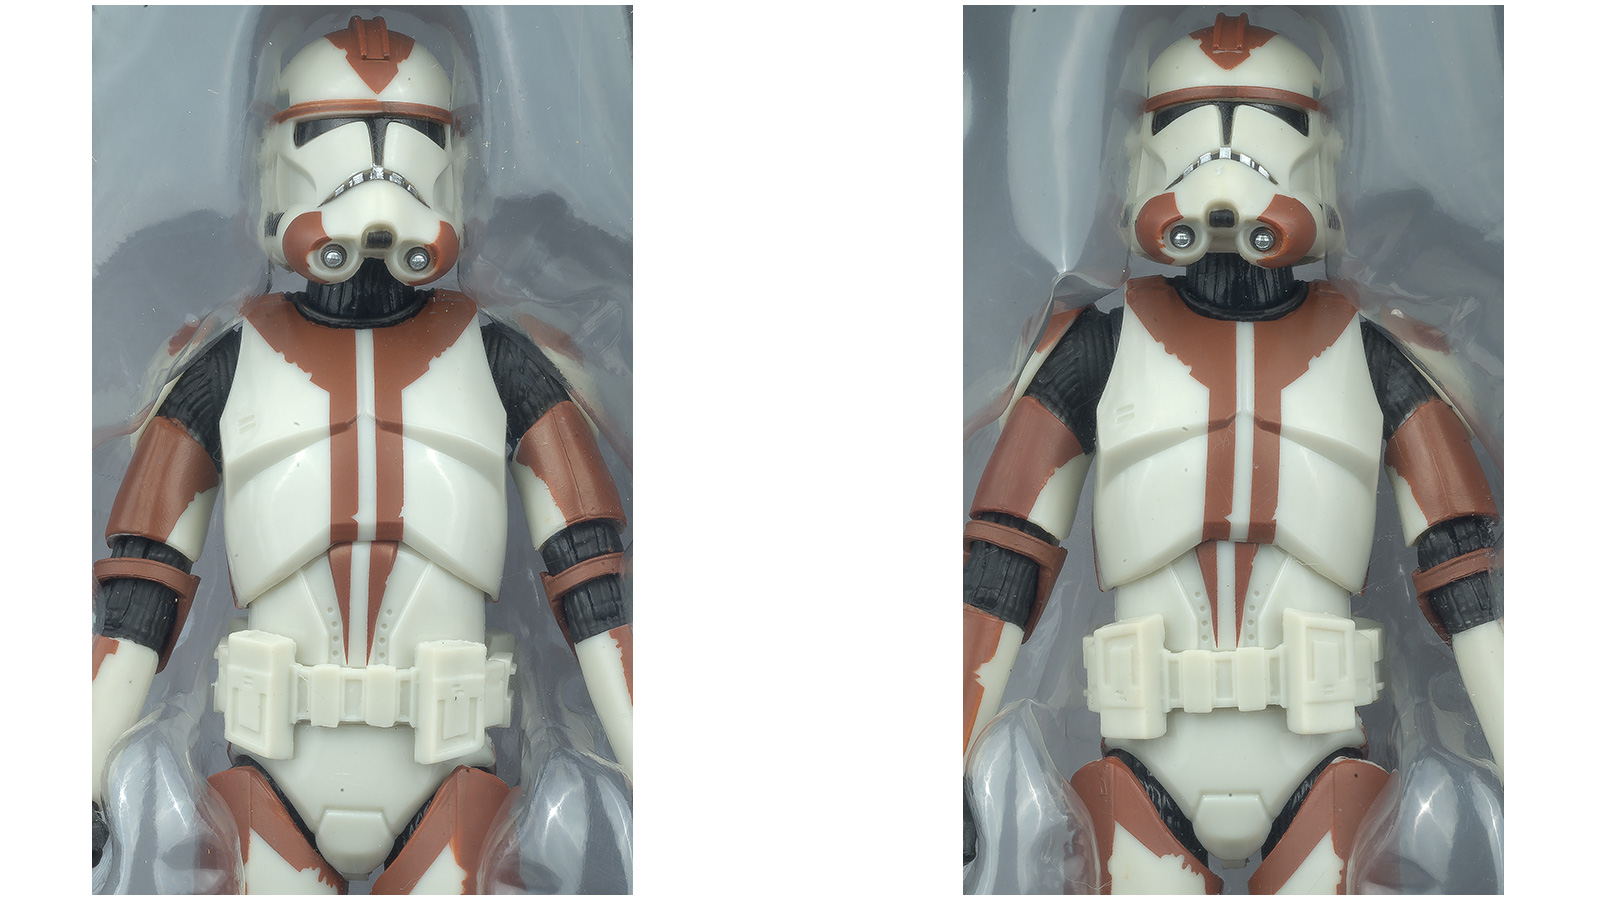 Error And Correction Found - Walgreens Exclusive TBS 6-Inch 10: Clonetrooper (187th Battalion) Figure